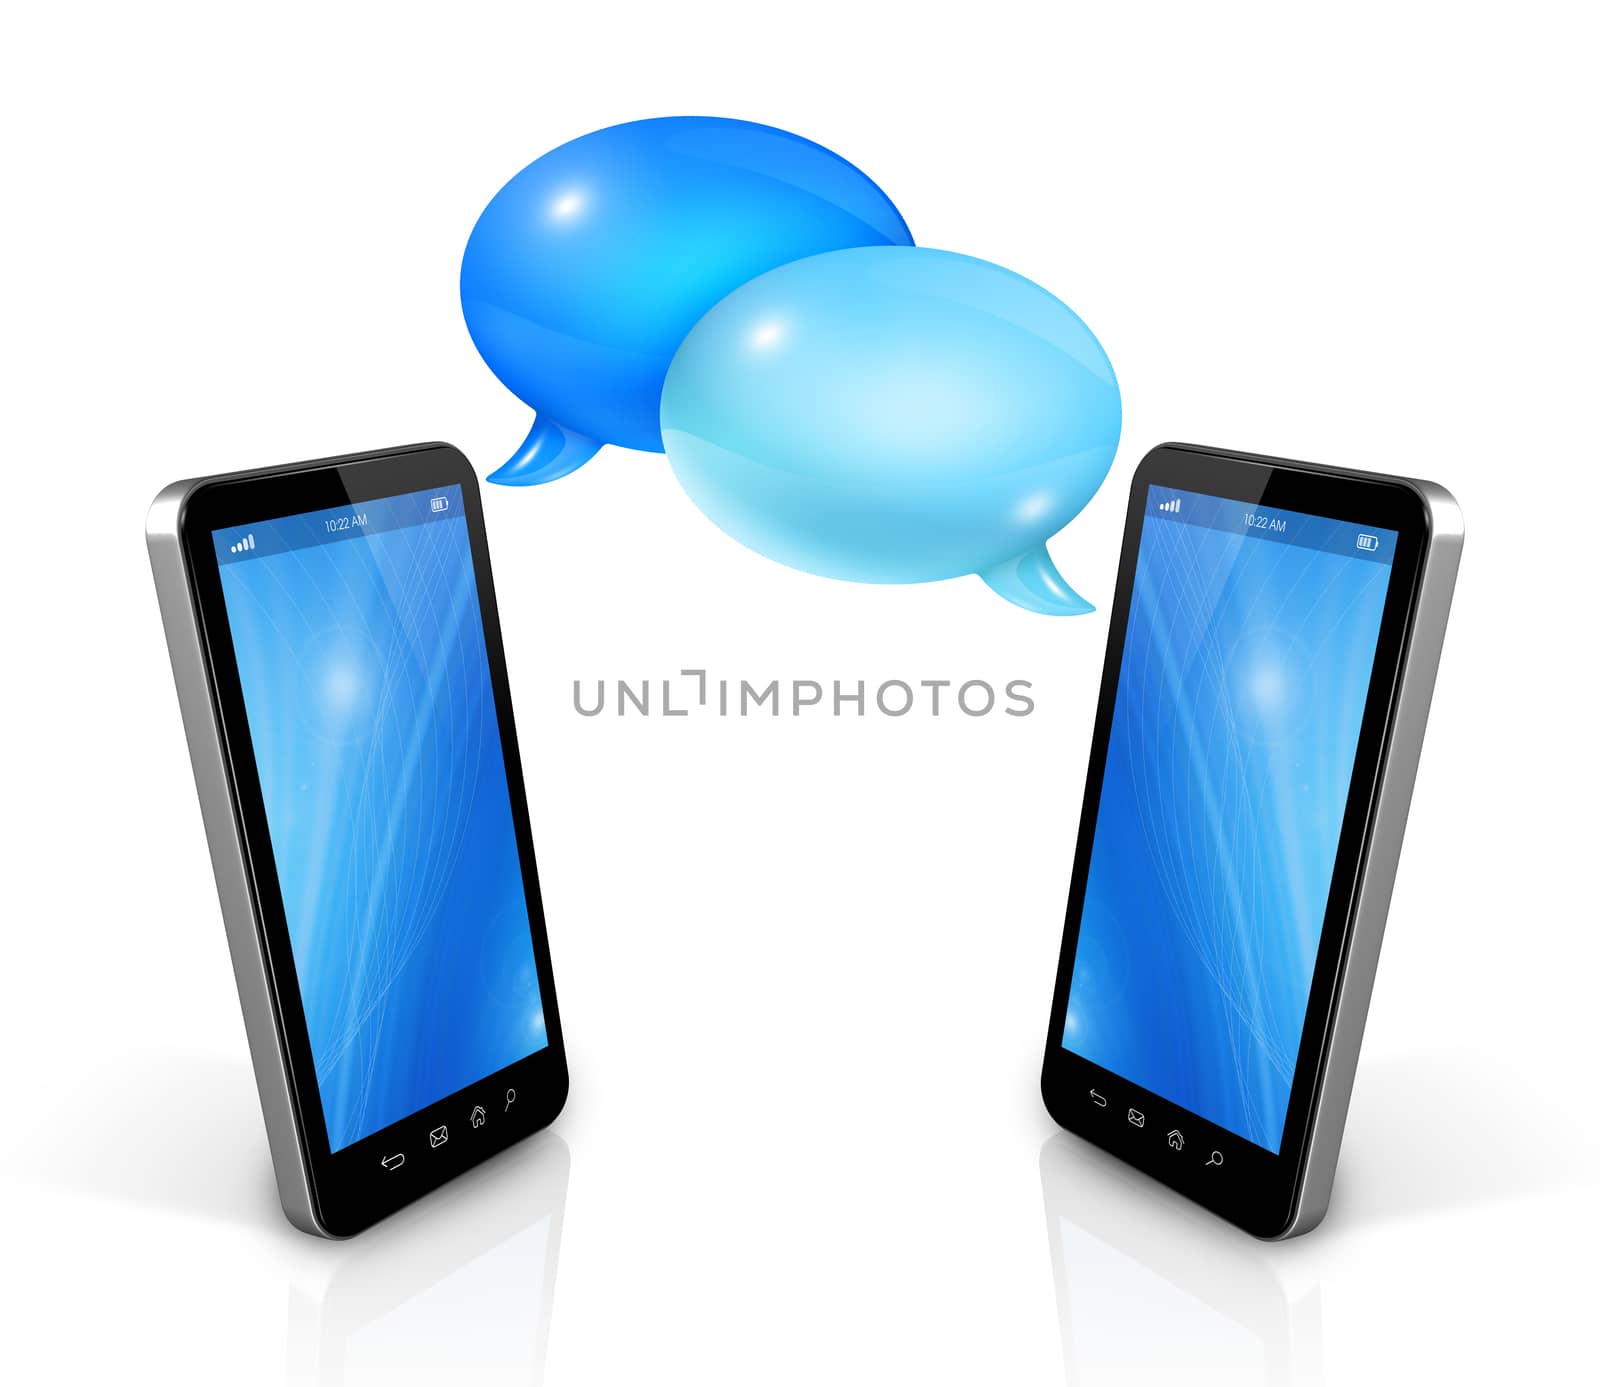 Speech bubbles and mobile phones by daboost